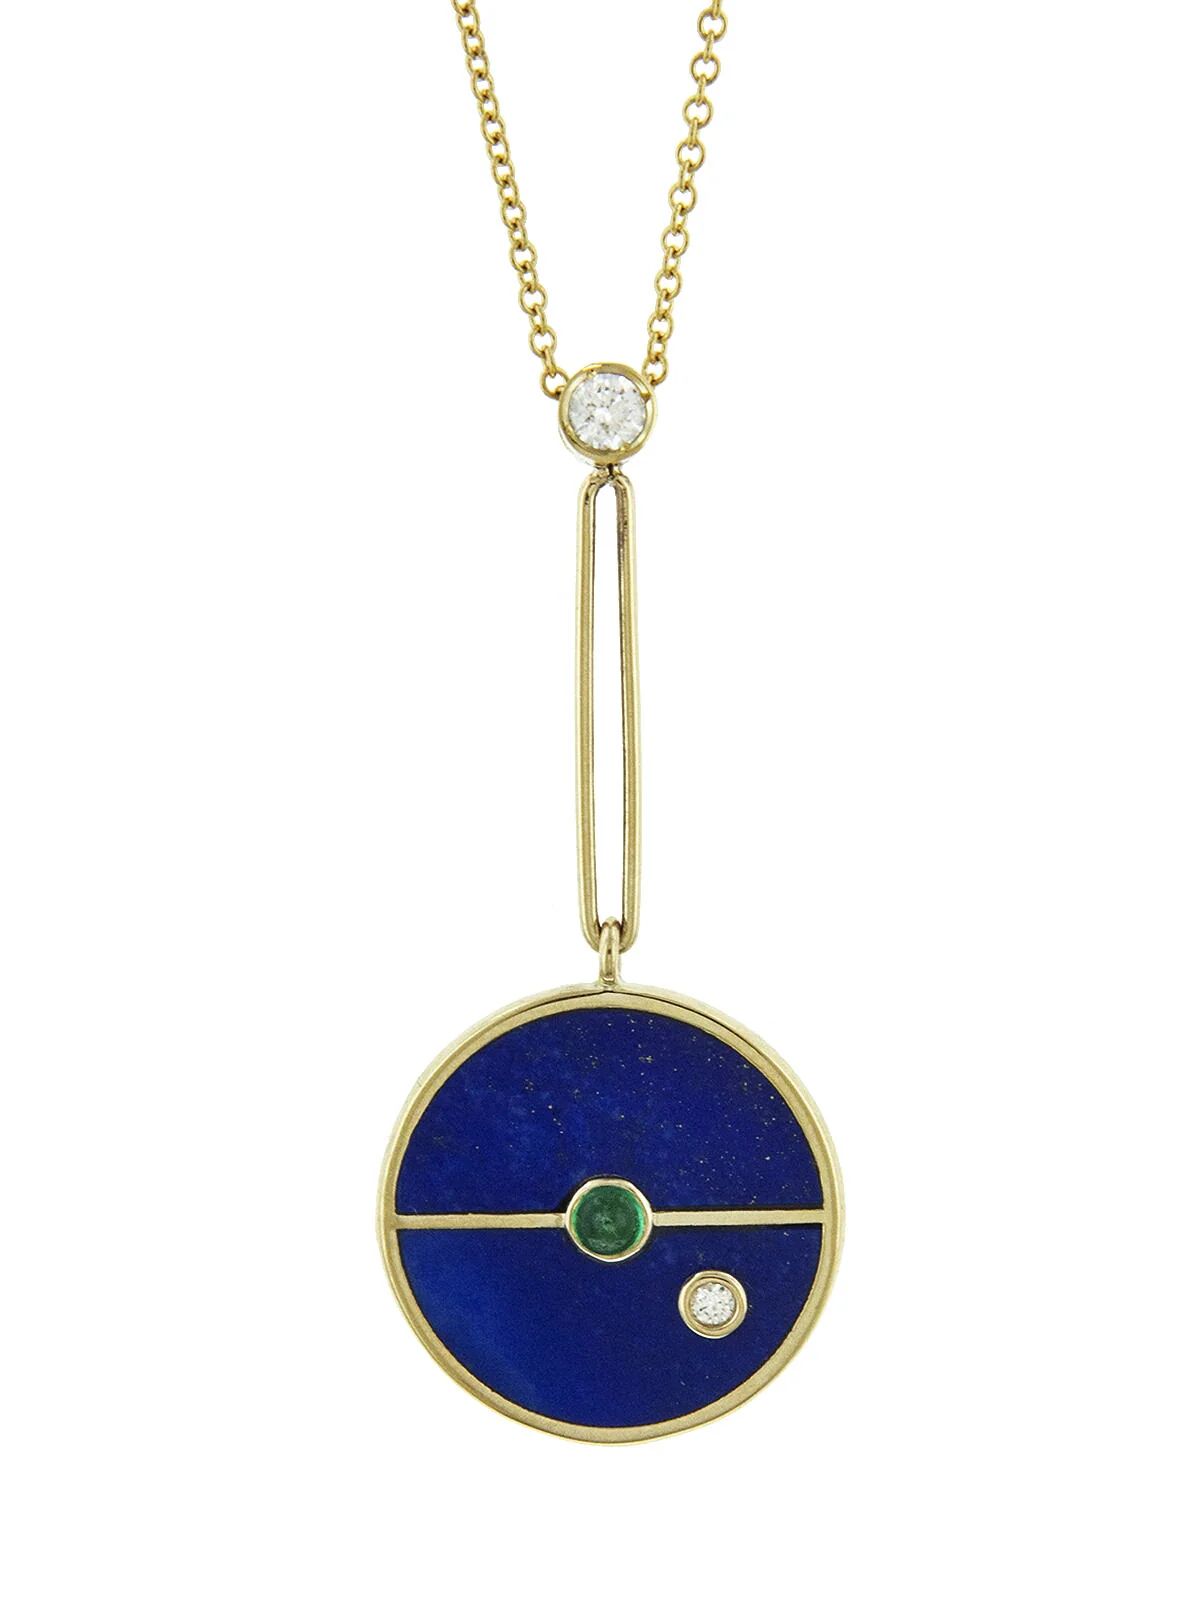 Signature Lapis and Emerald Compass Yellow Gold Pendant Necklace | YLANG 23